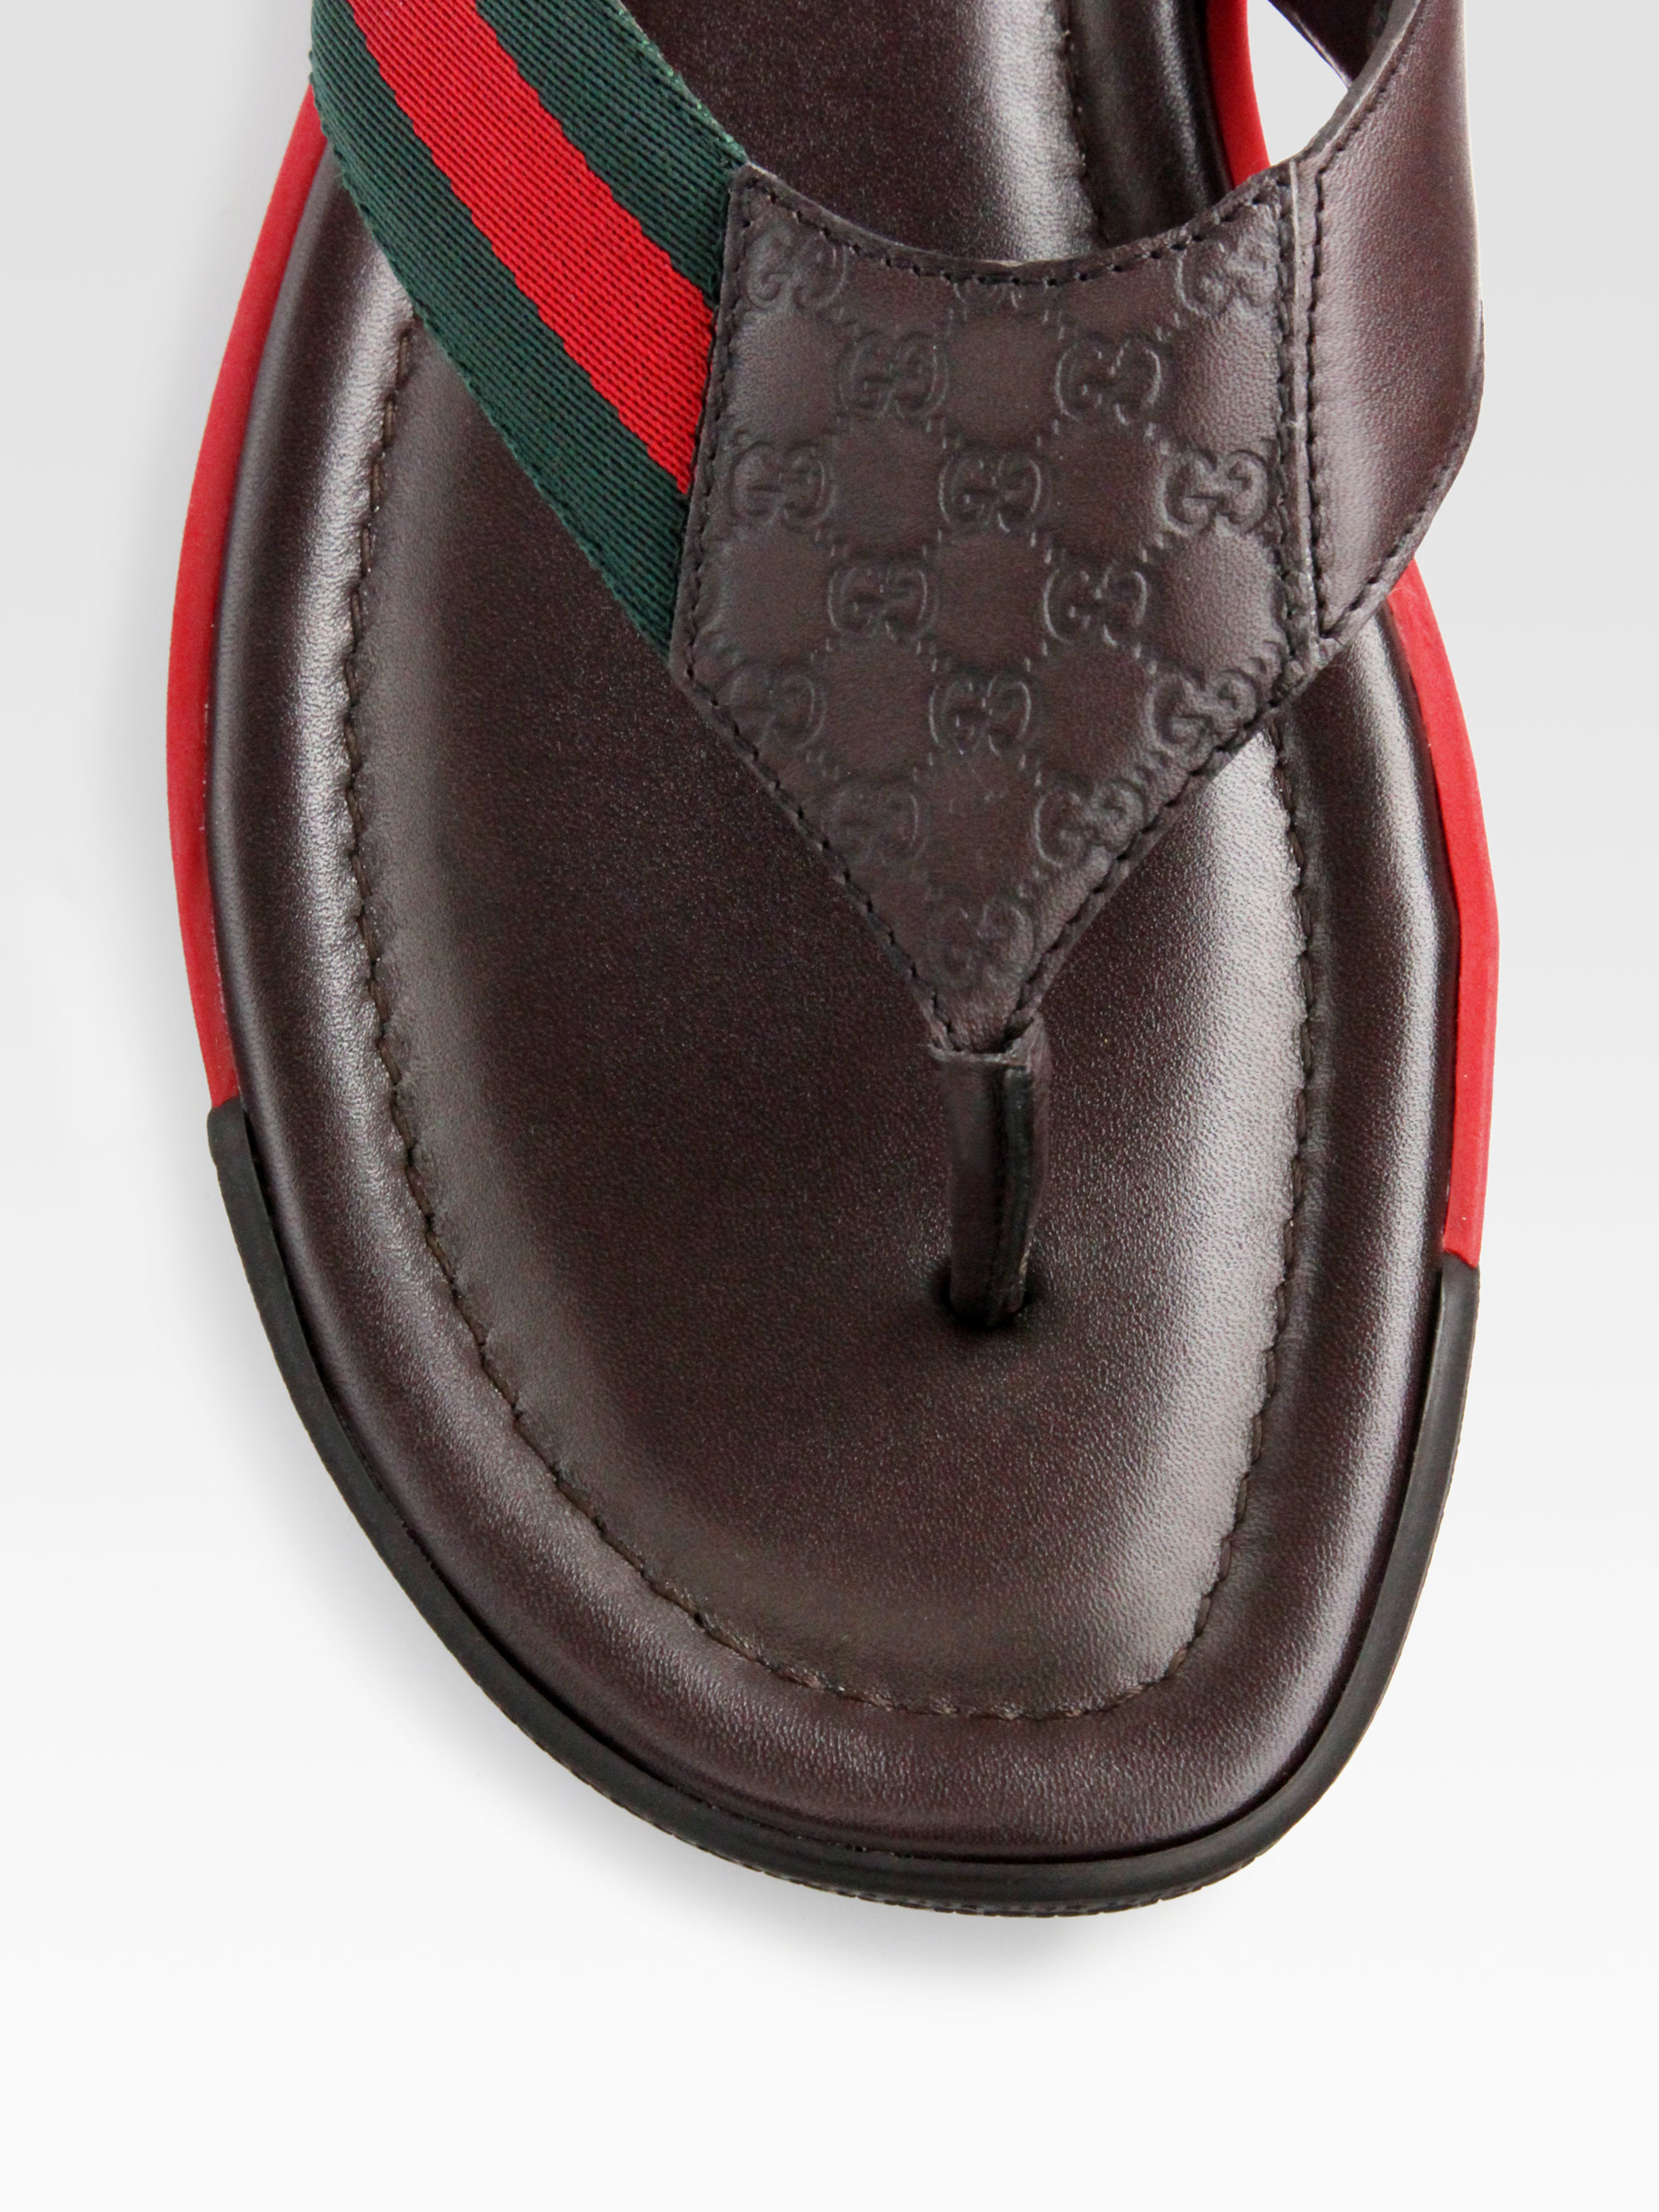  Gucci  Thong Sandals  in Dark Chocolate Brown for Men Lyst